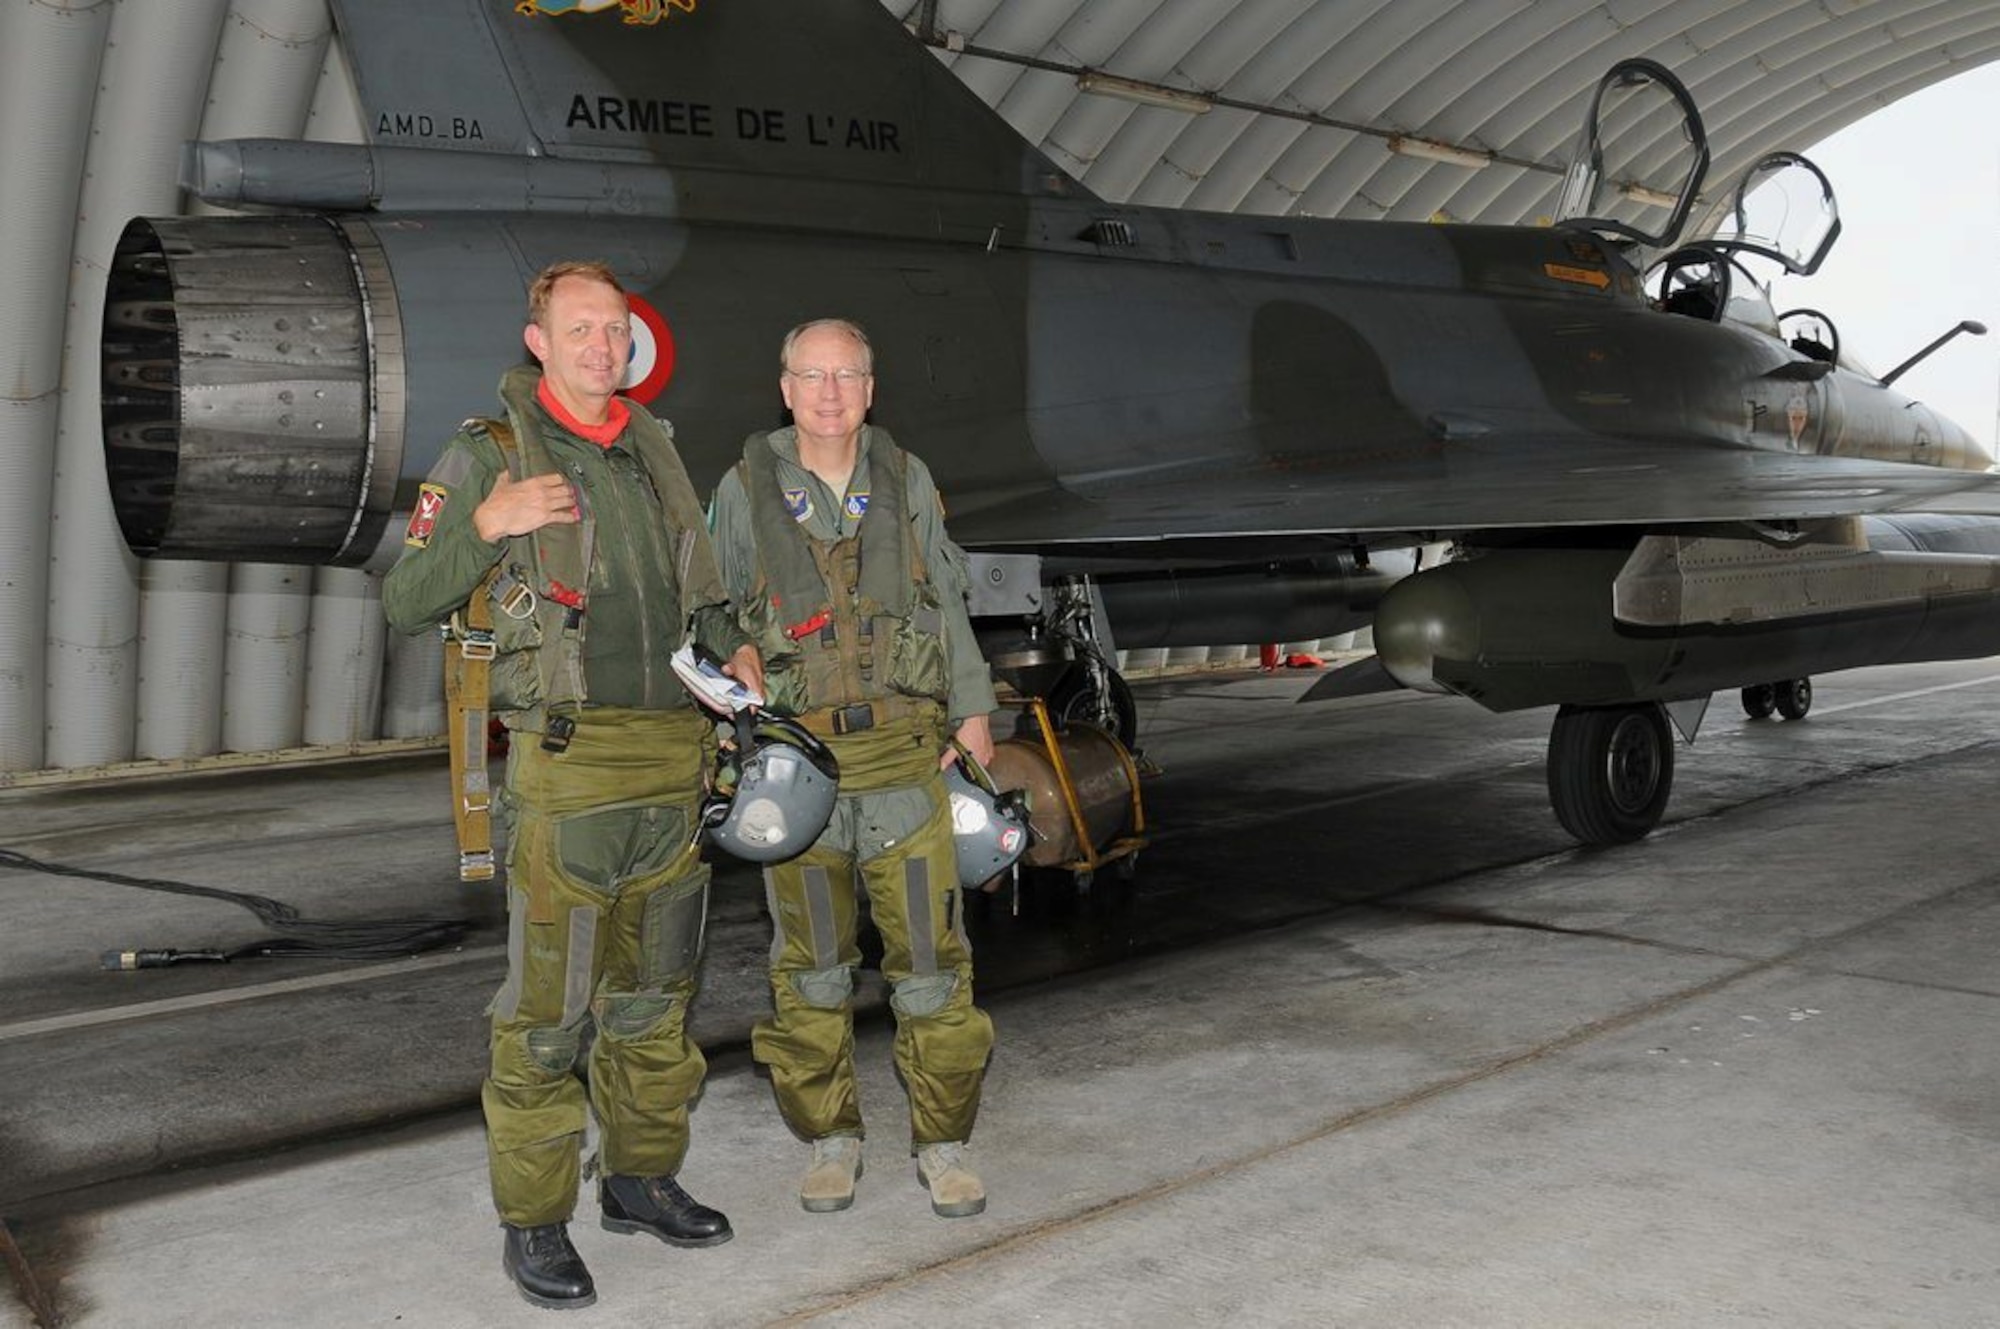 ISTRES AIR BASE, France - Lt. Gen. Frank Klotz, Commander of Air Force
Global Strike Command, prepares to fly in the back seat of a Mirage 2000N on
July 13, while in Europe meeting with French counterparts. (Photo Courtesy
of French Strategic Air Forces)